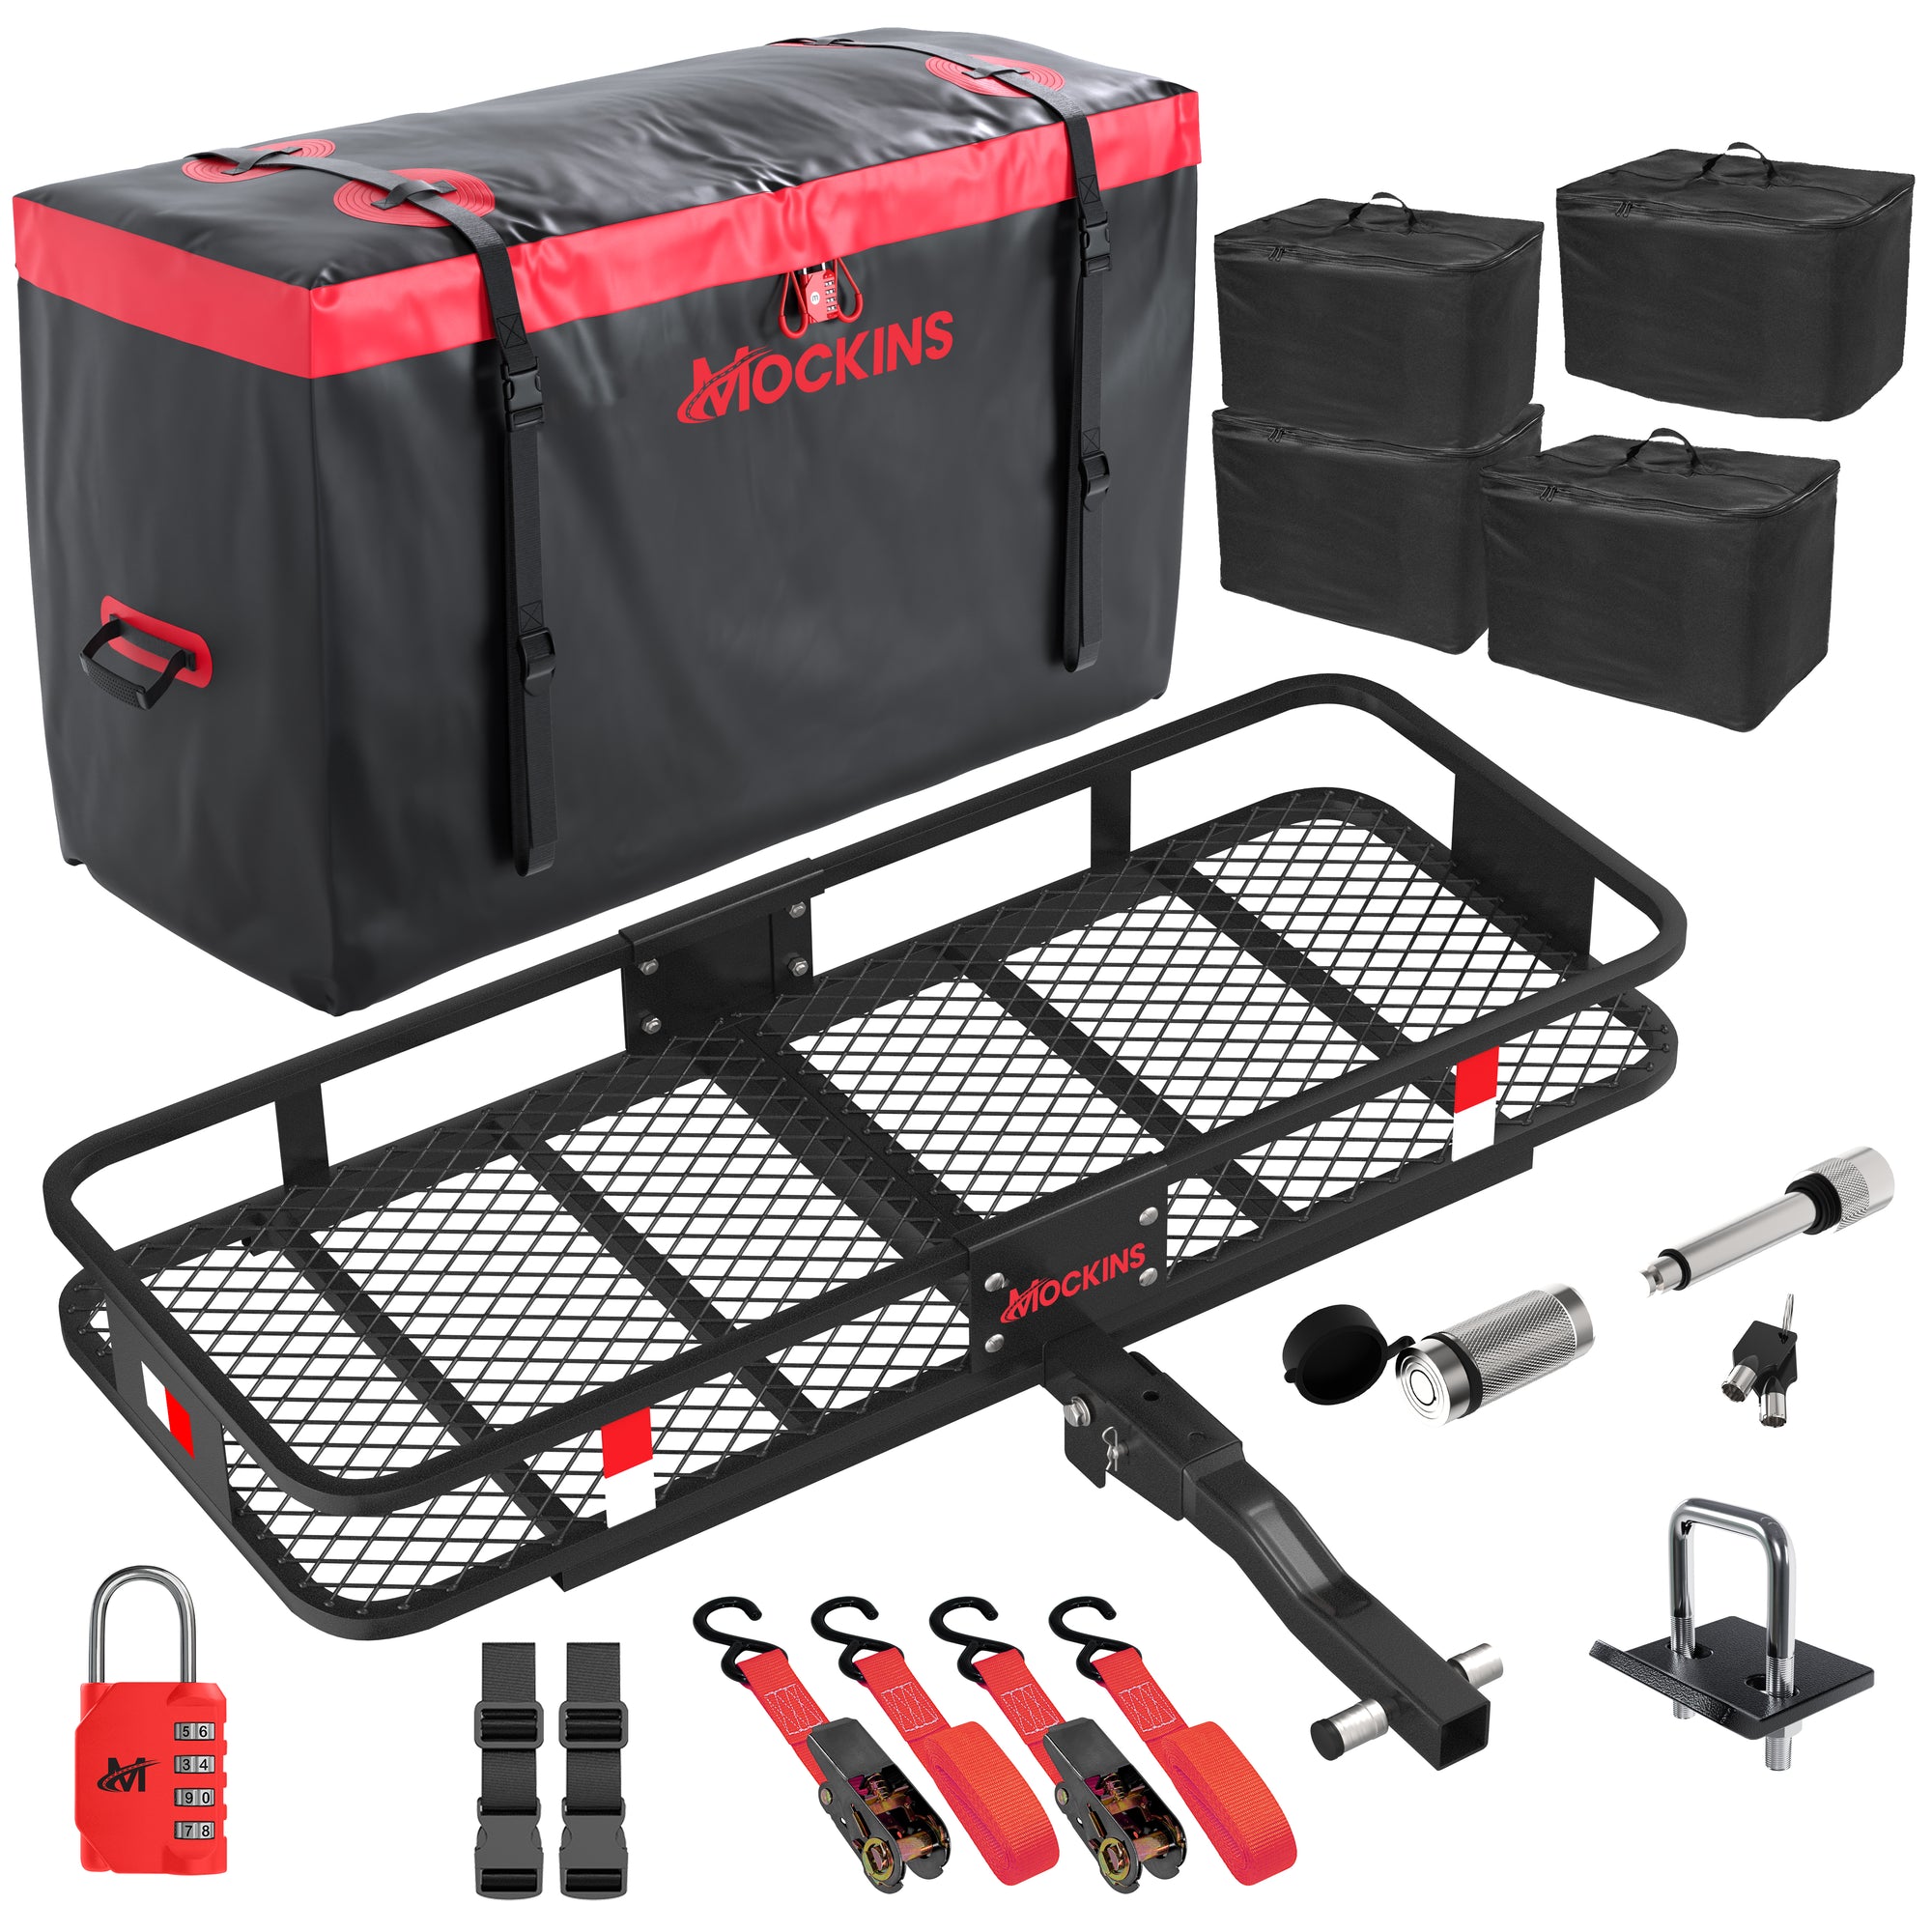 500lb Capacity Rustproof Hitch Mount Cargo Carrier + 15 Cu.ft Waterproof Cargo Bag and Packing Cubes